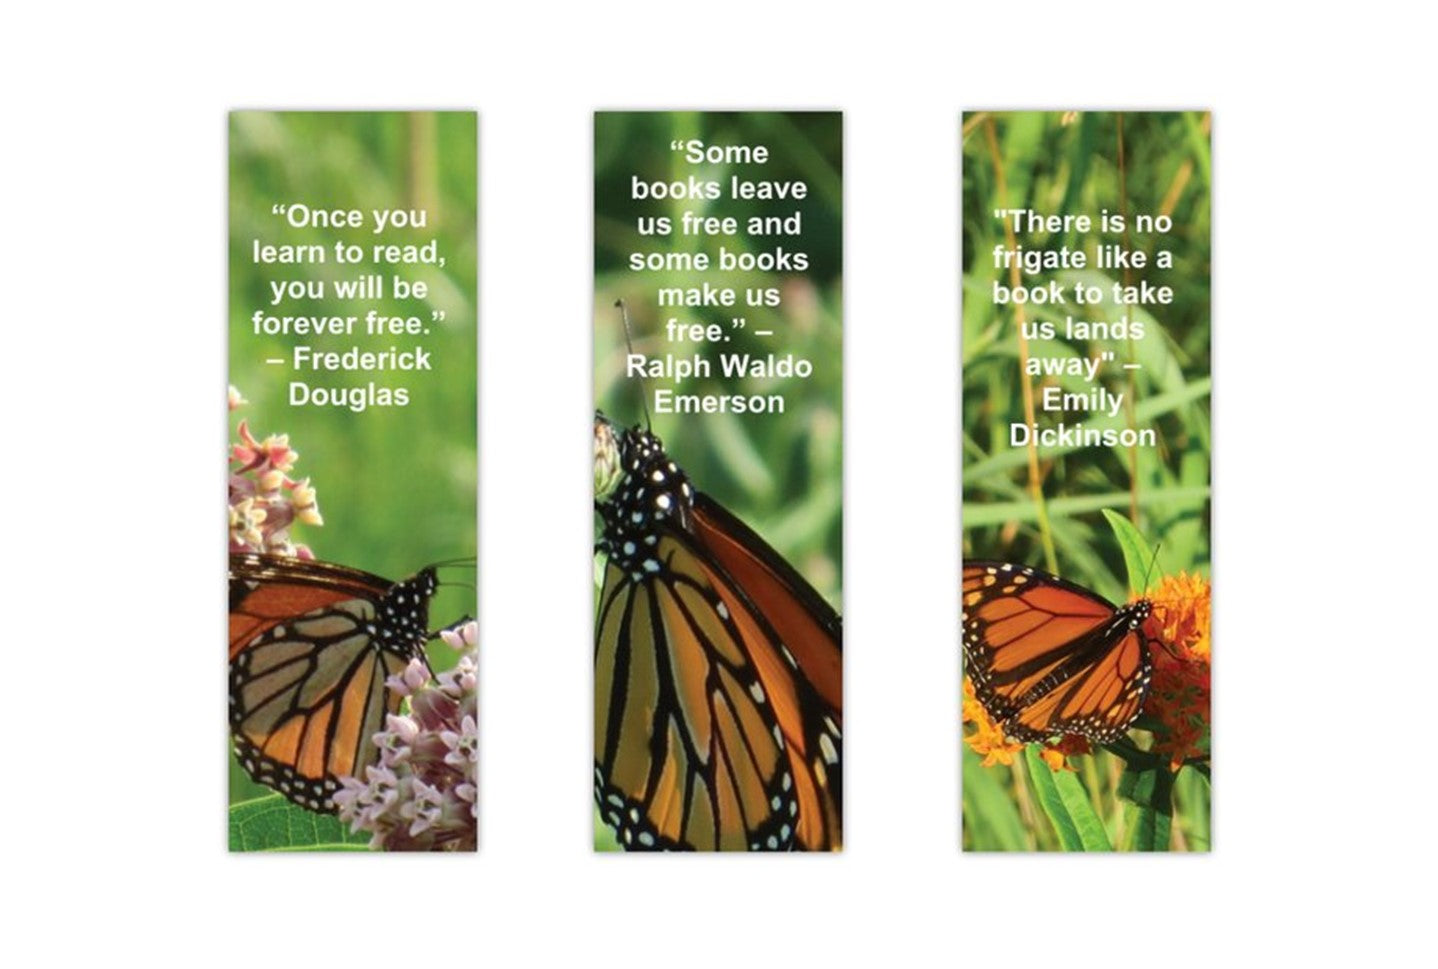 Bookmarks - Butterfly Photo Bookmarks - Set of 3 Monarch Butterfly Bookmarks - Book Lover Gift - Gift for Reader (Stationery & More) (Literacy Project)